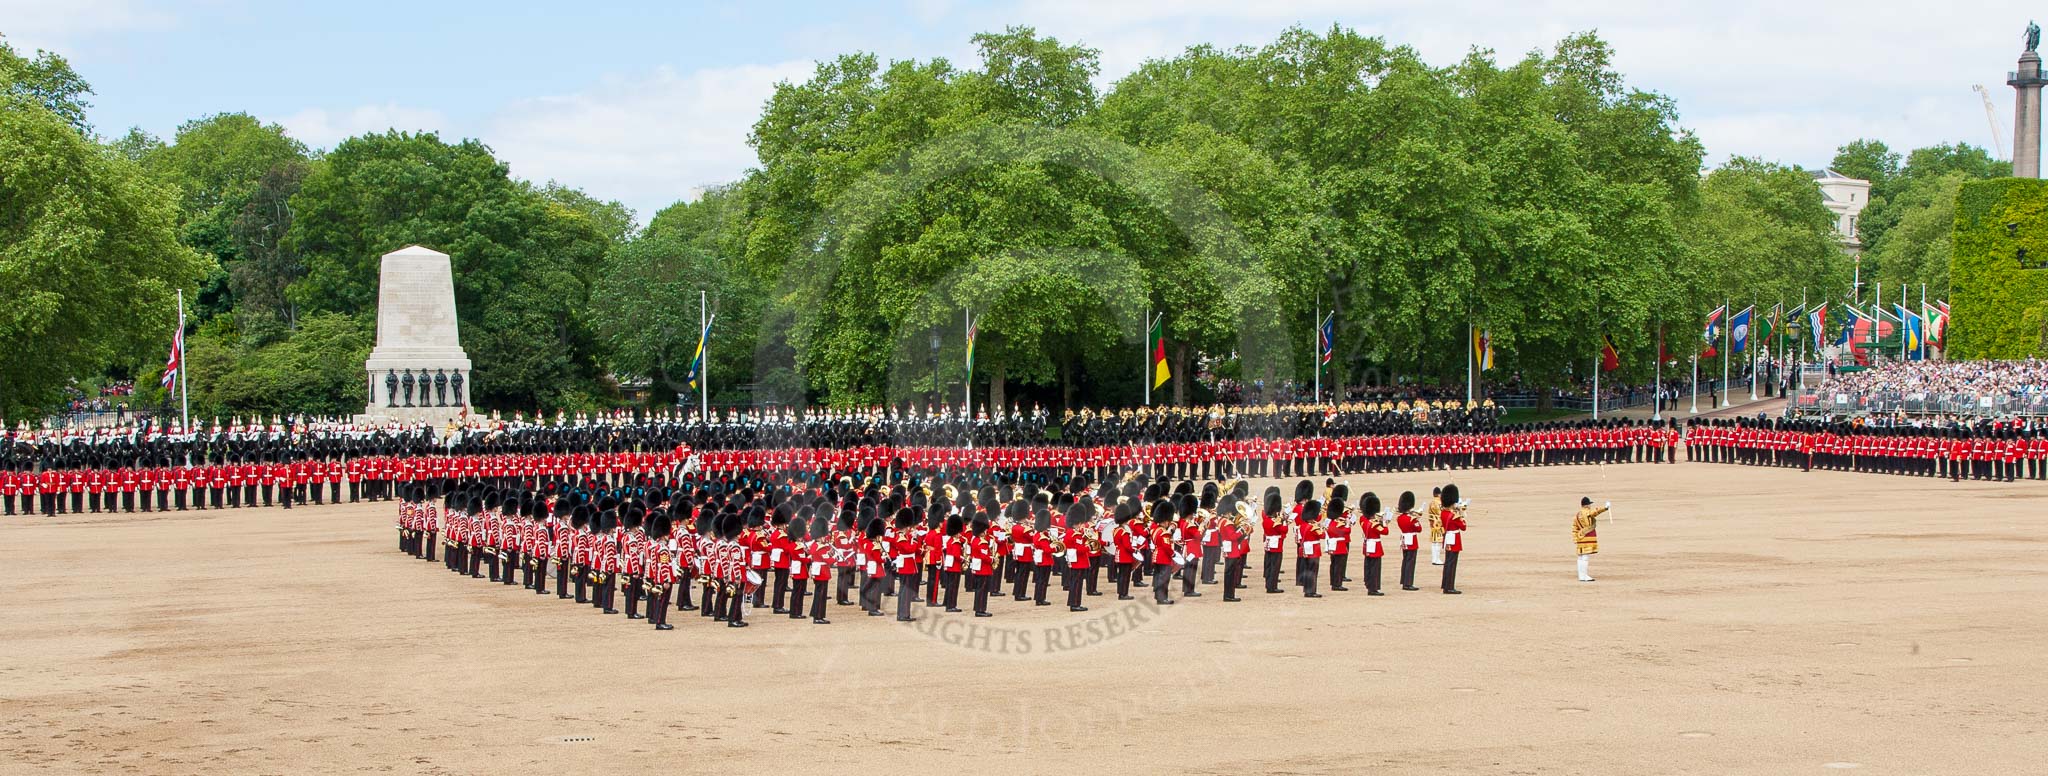 The Colonel's Review 2013: The massed Bands and Corps of Drums in the center of the Horse Guards Parade..
Horse Guards Parade, Westminster,
London SW1,

United Kingdom,
on 08 June 2013 at 11:14, image #464